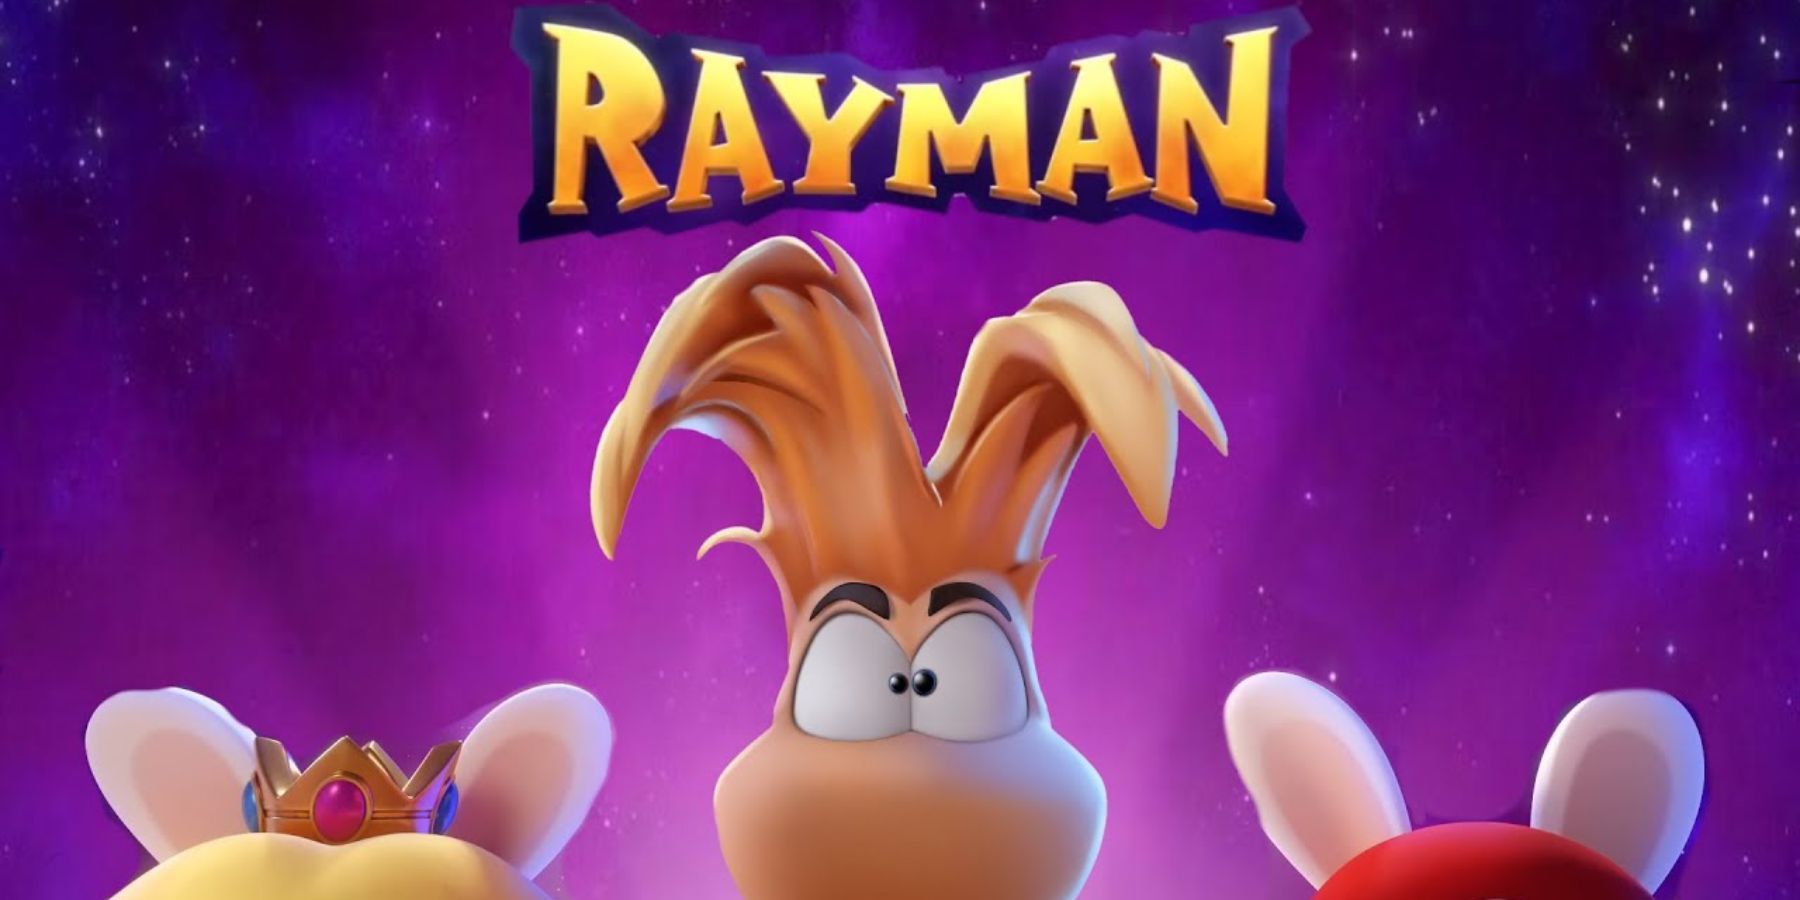 Mario + Rabbids Sparks of Hope: Rayman in the Phantom Show DLC Coming  August 30